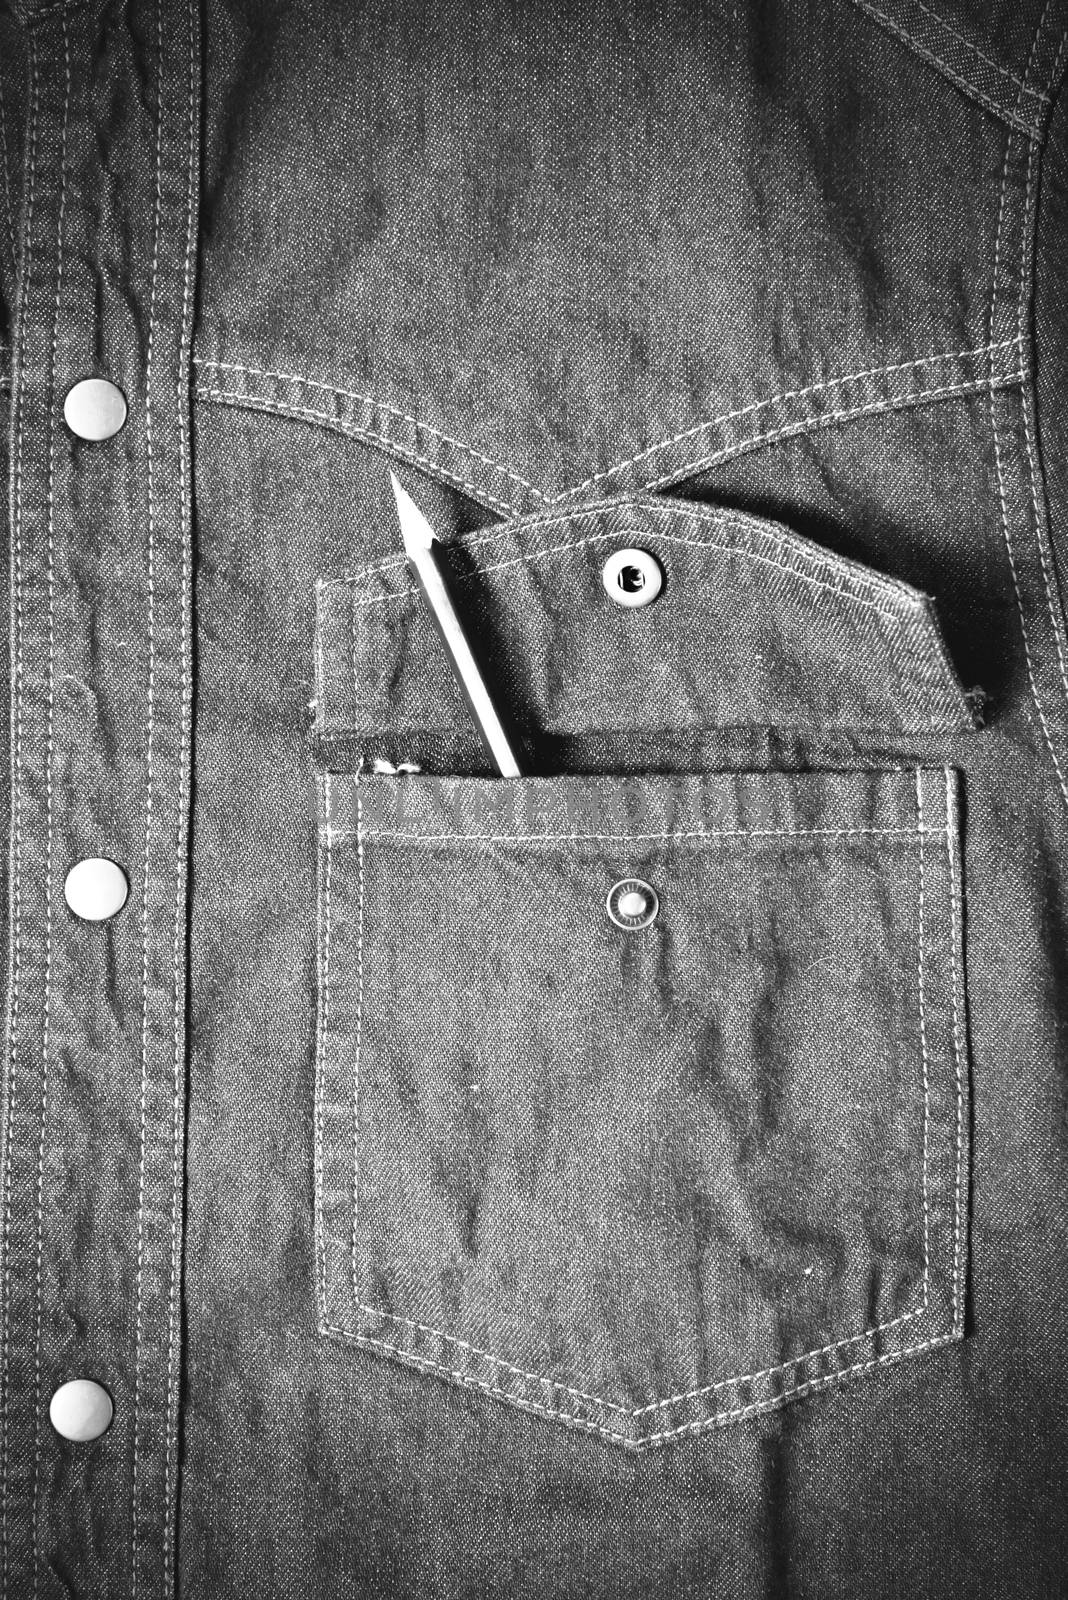 pencil in jean pocket black and white tone color style by ammza12